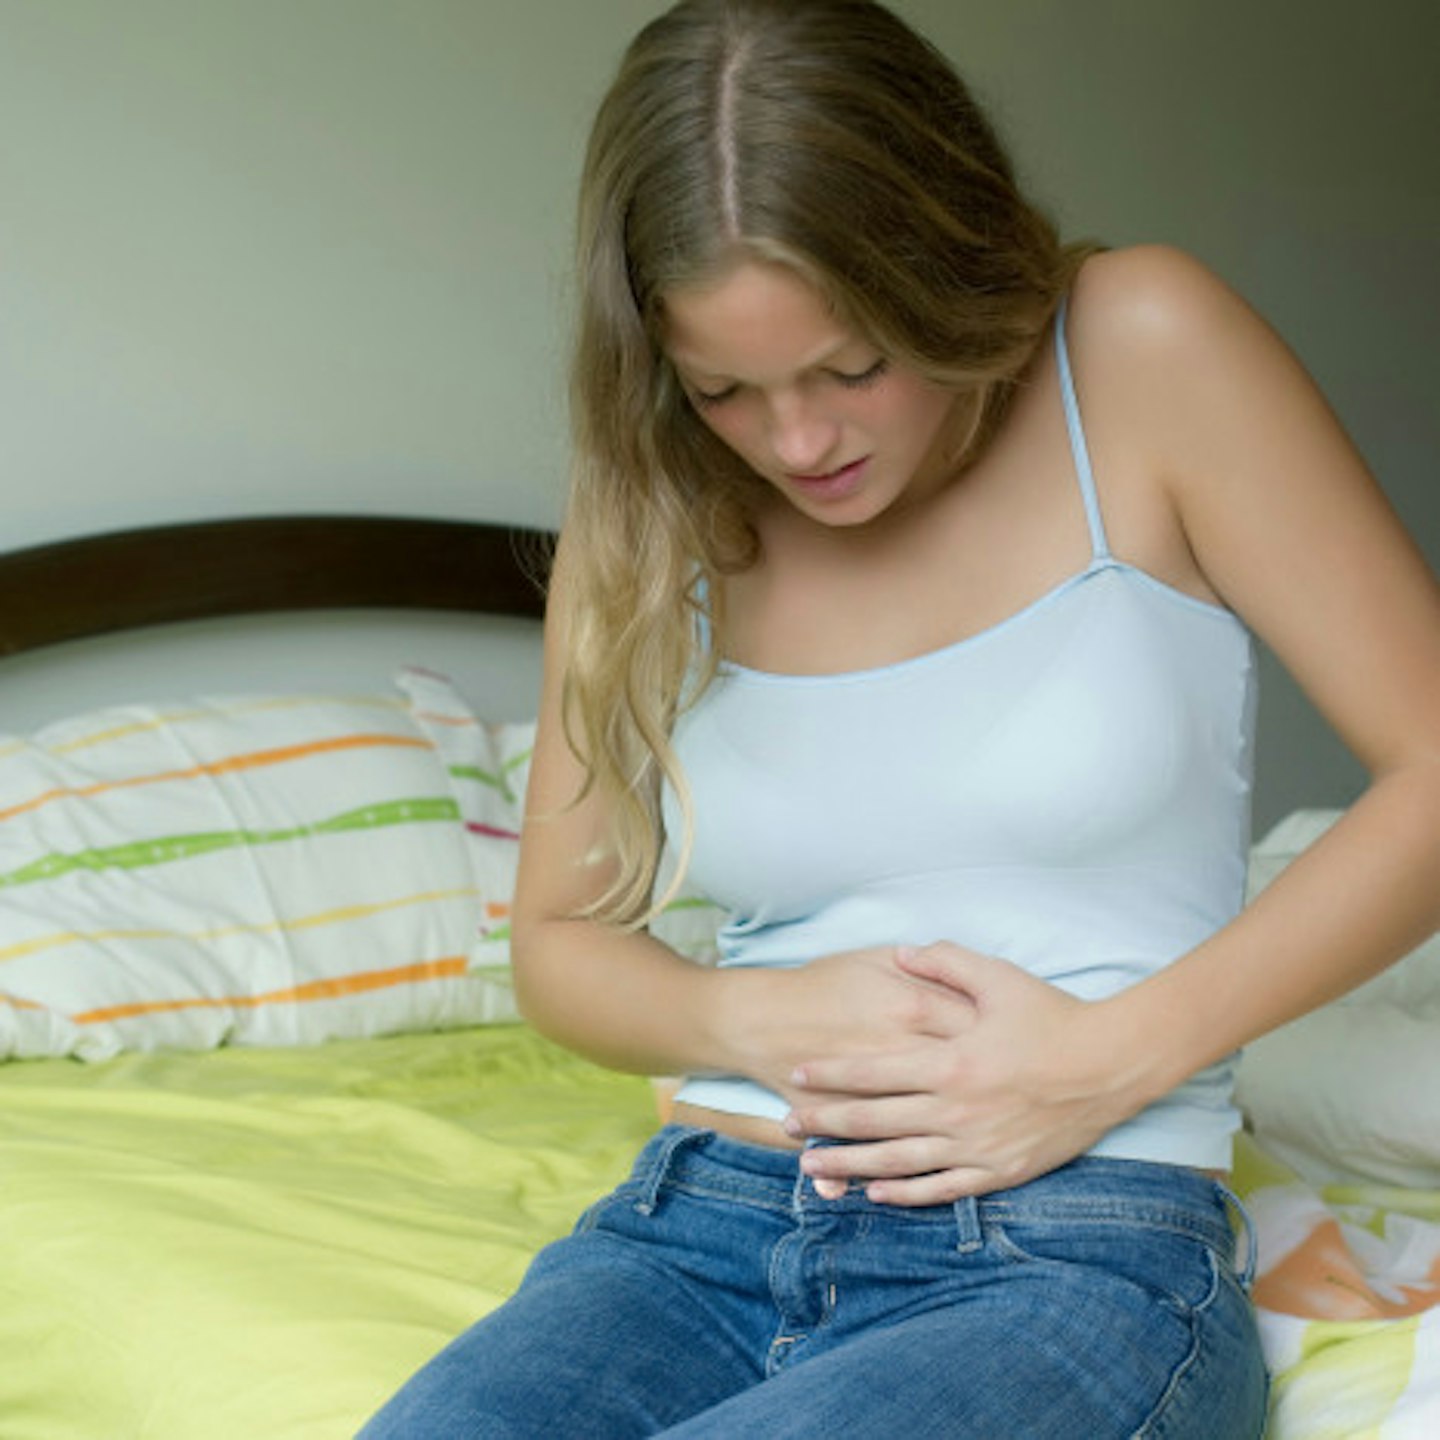 Ovulation syndrome can cause bloating and cramping